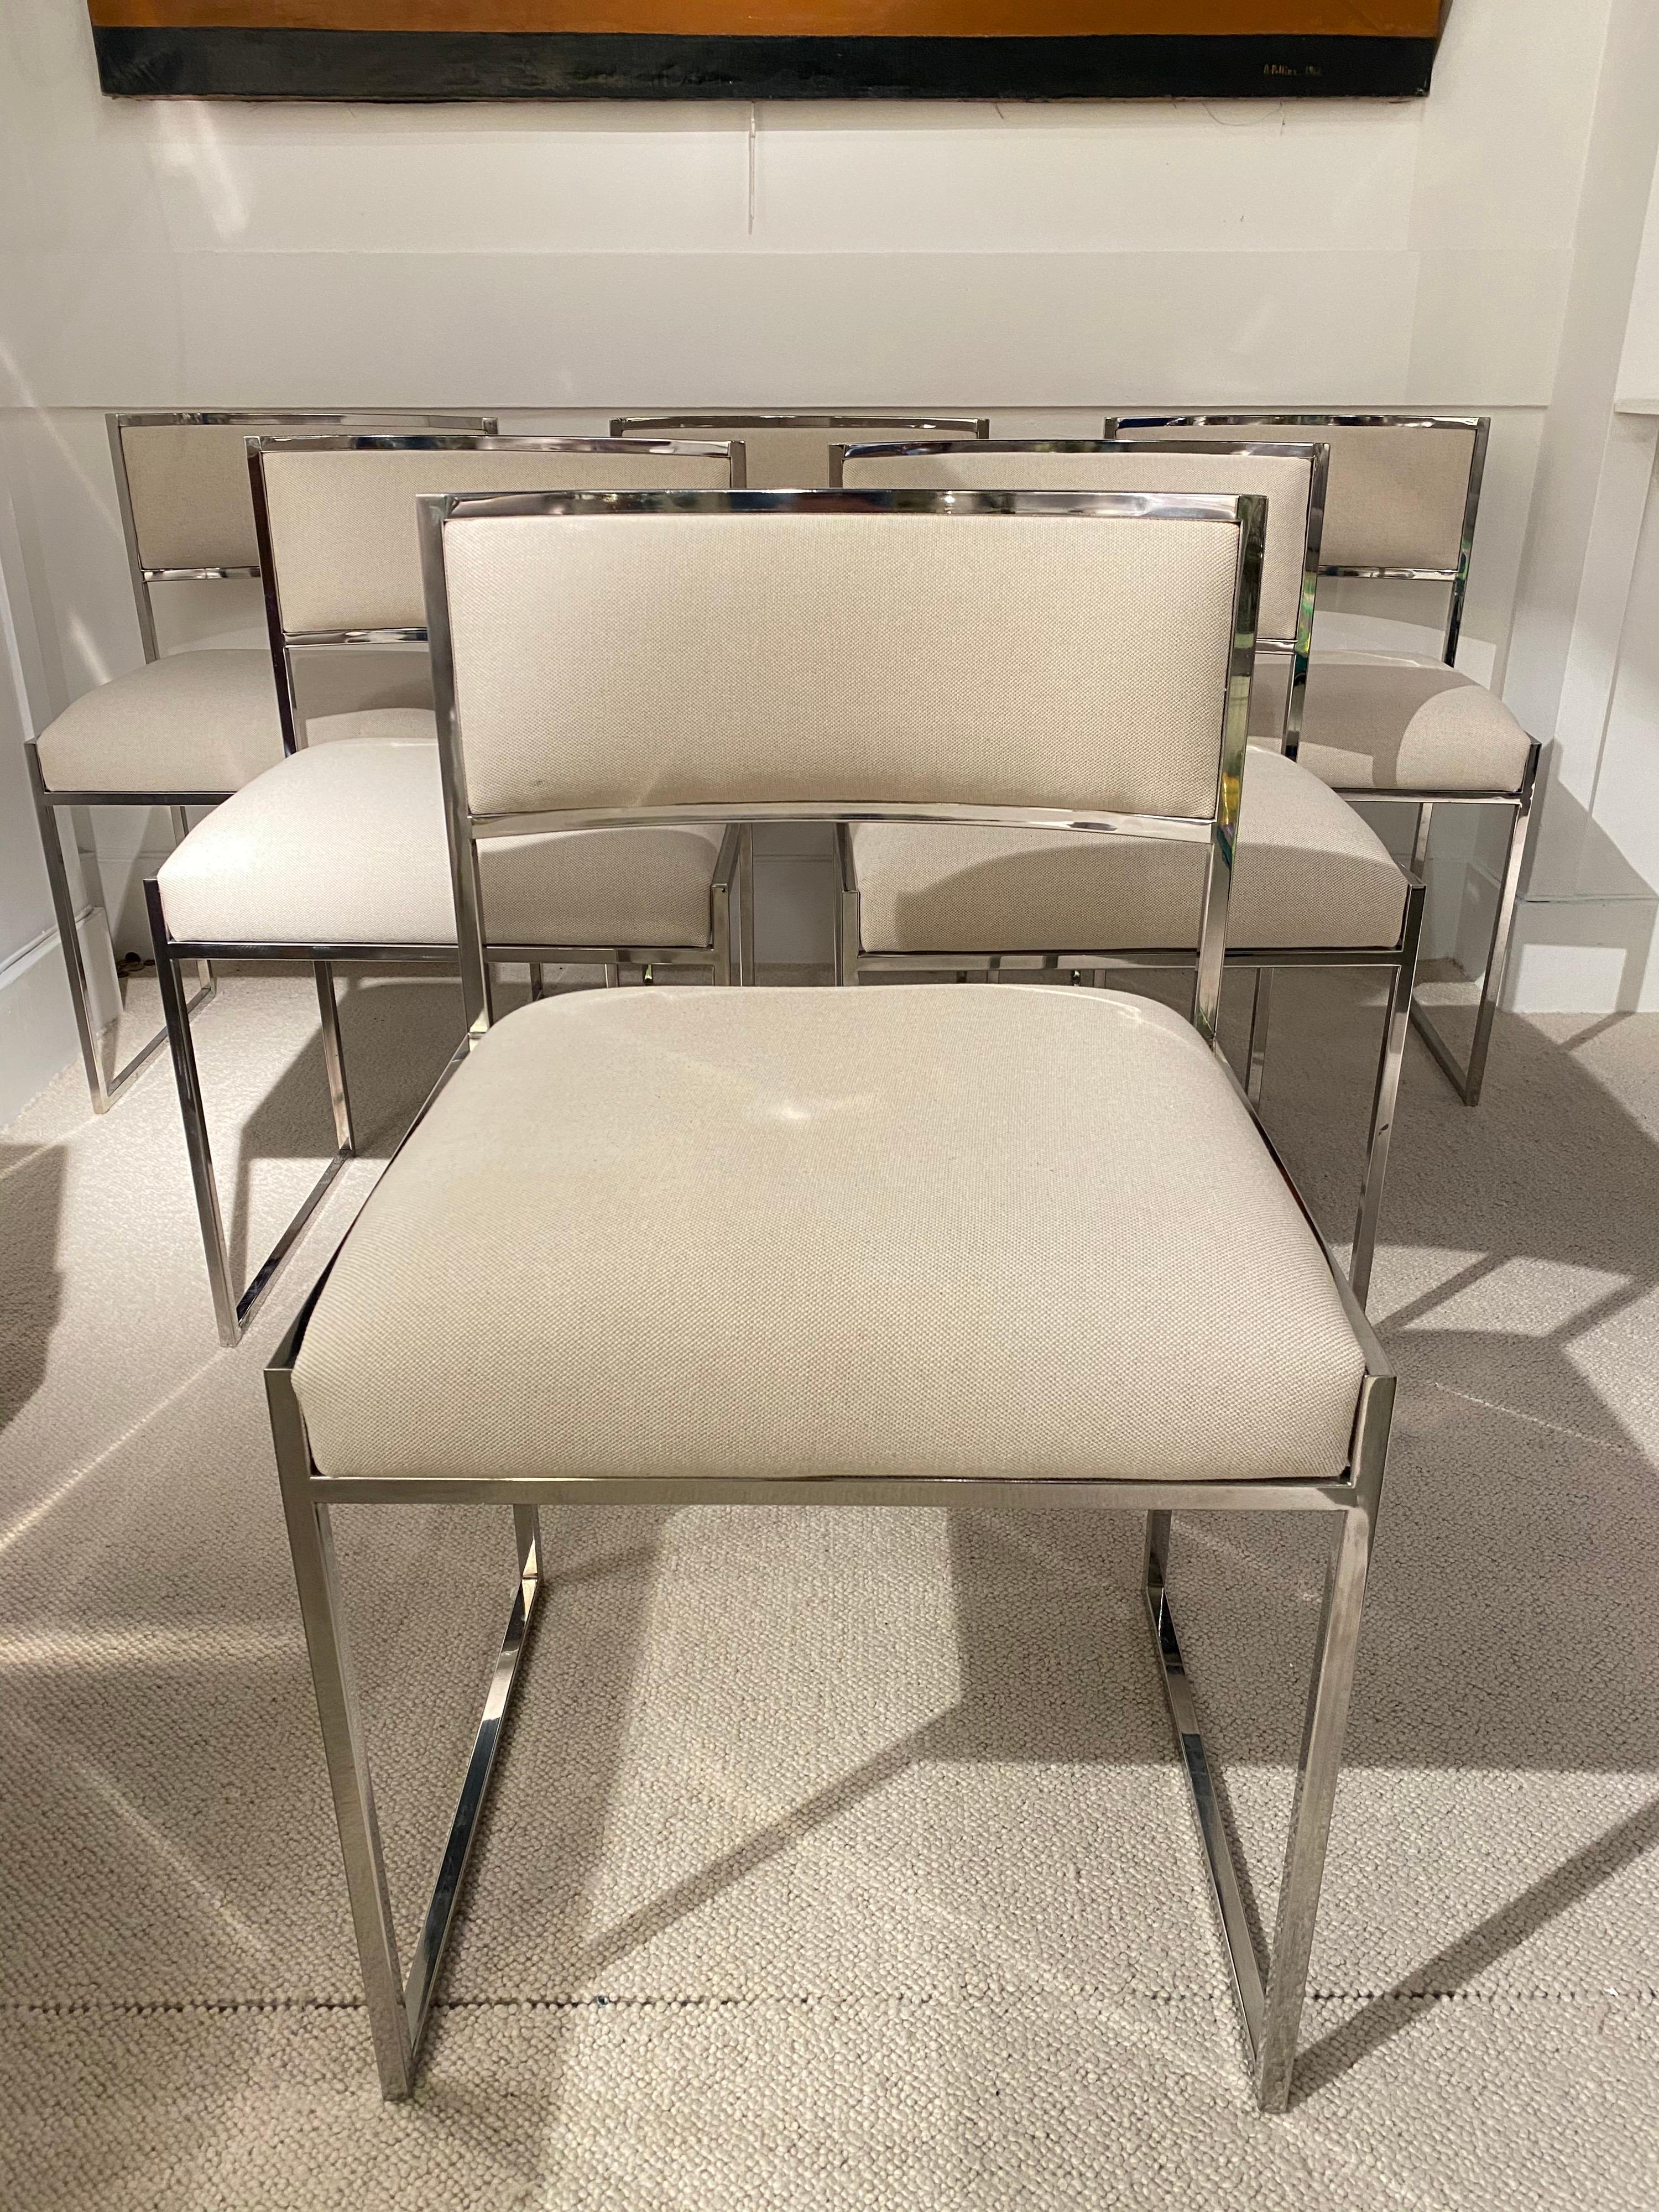 Six chairs in chromed steel and fabric By Willy Rizzo
New upholstered
Good vintage condition.